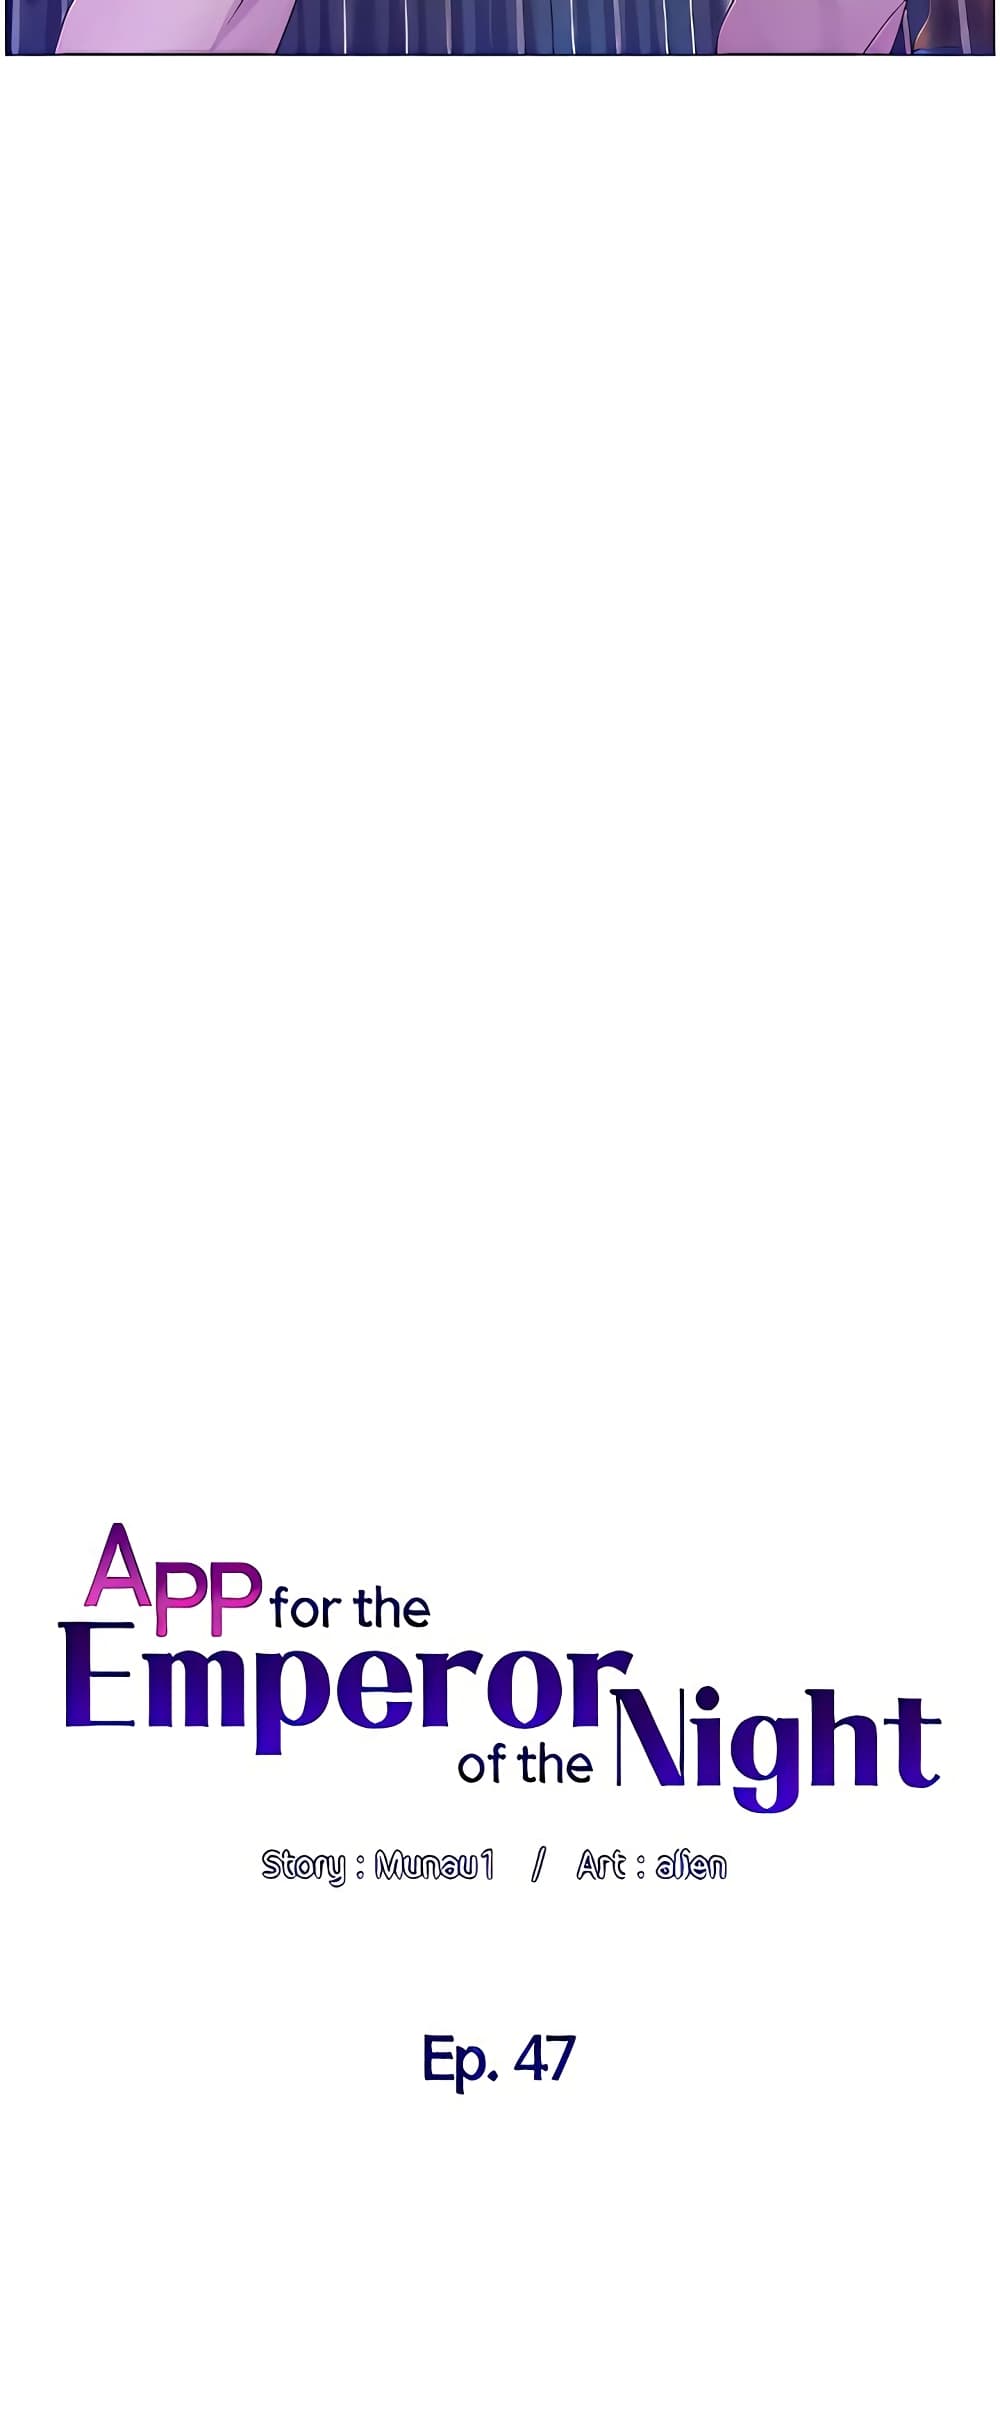 APP for the Emperor of the Night 47-47